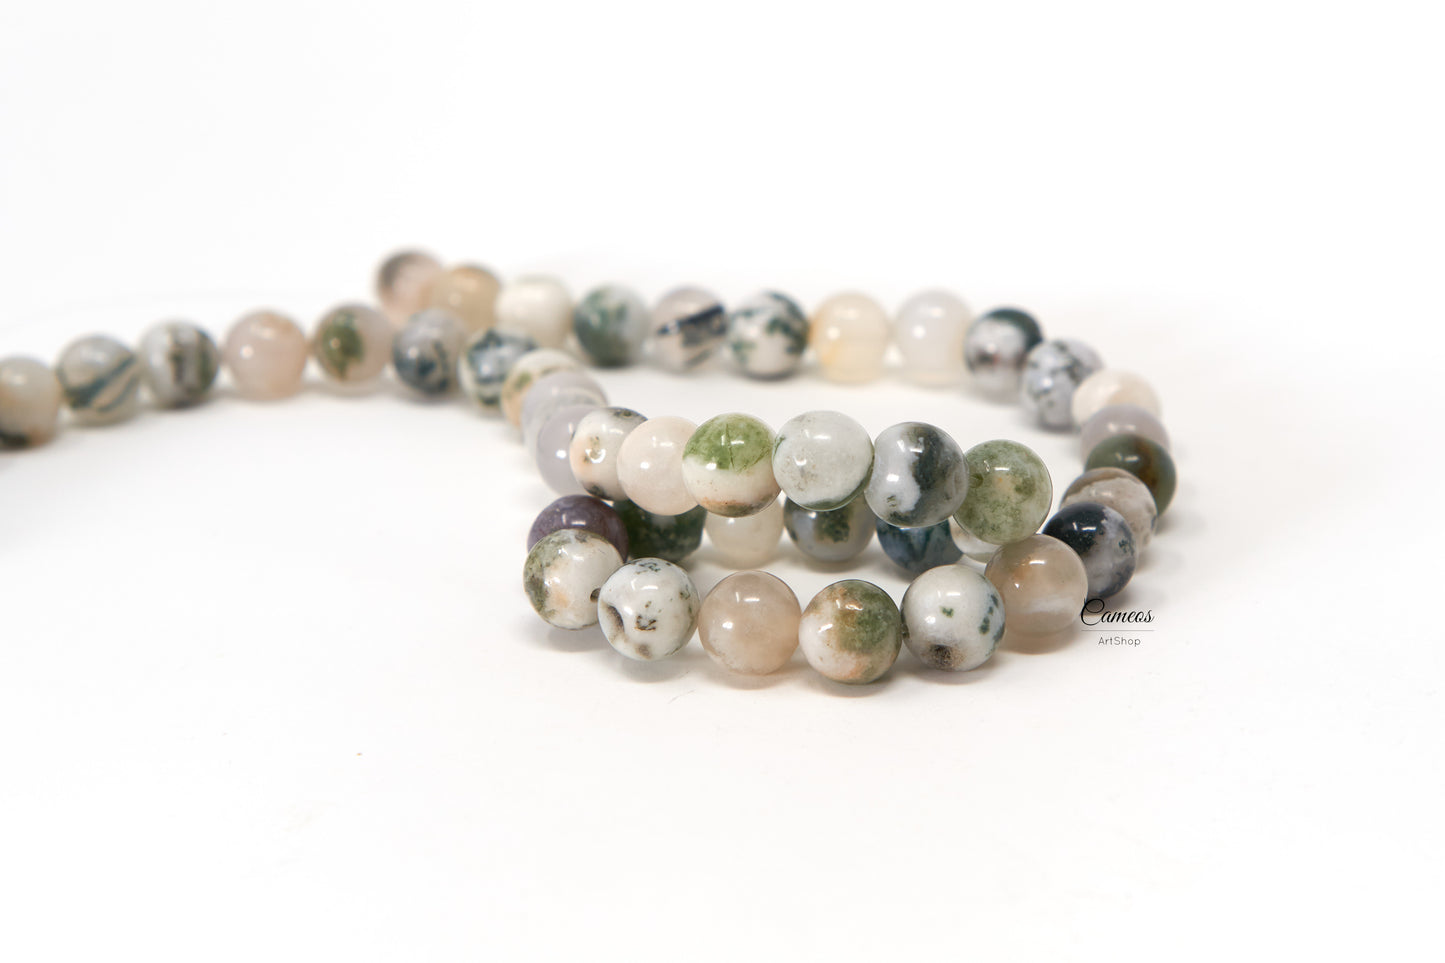 Tree Agate Beads, Natural 8mm Smooth Round Beads, 10 pcs